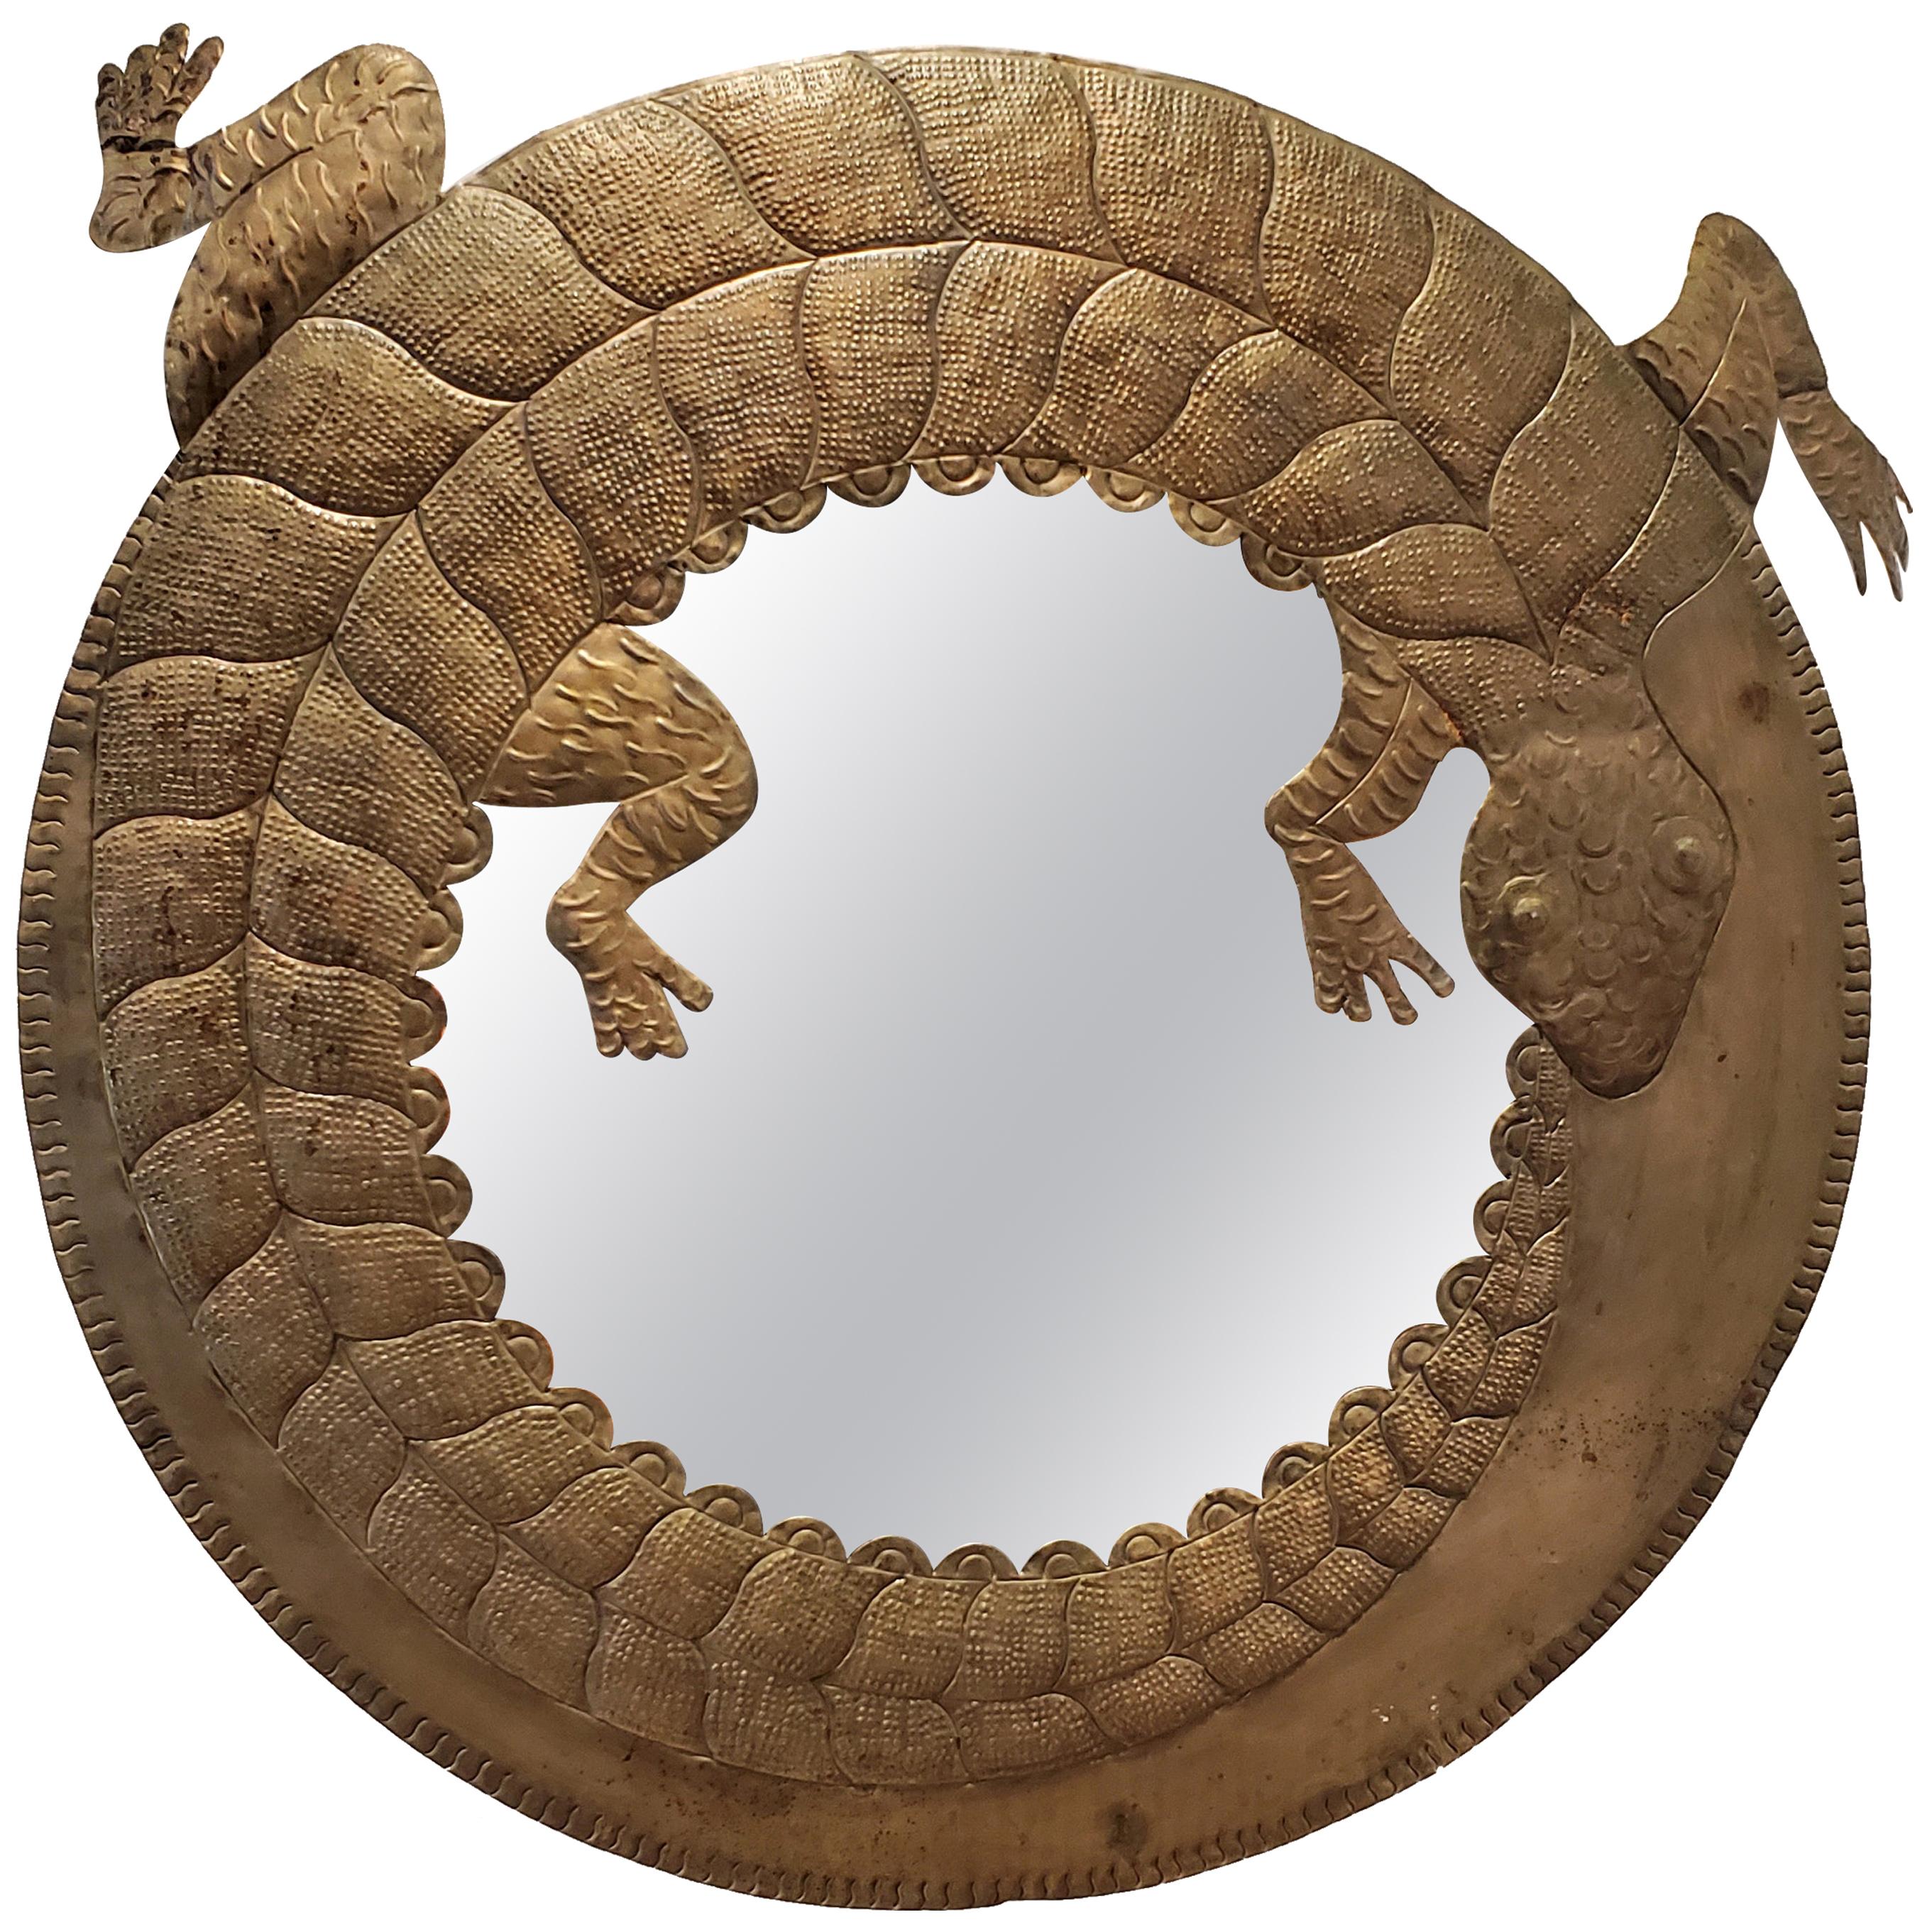 Vintage 1970s Mexican Hammered Brass Circular Coiled Lizard Mirror